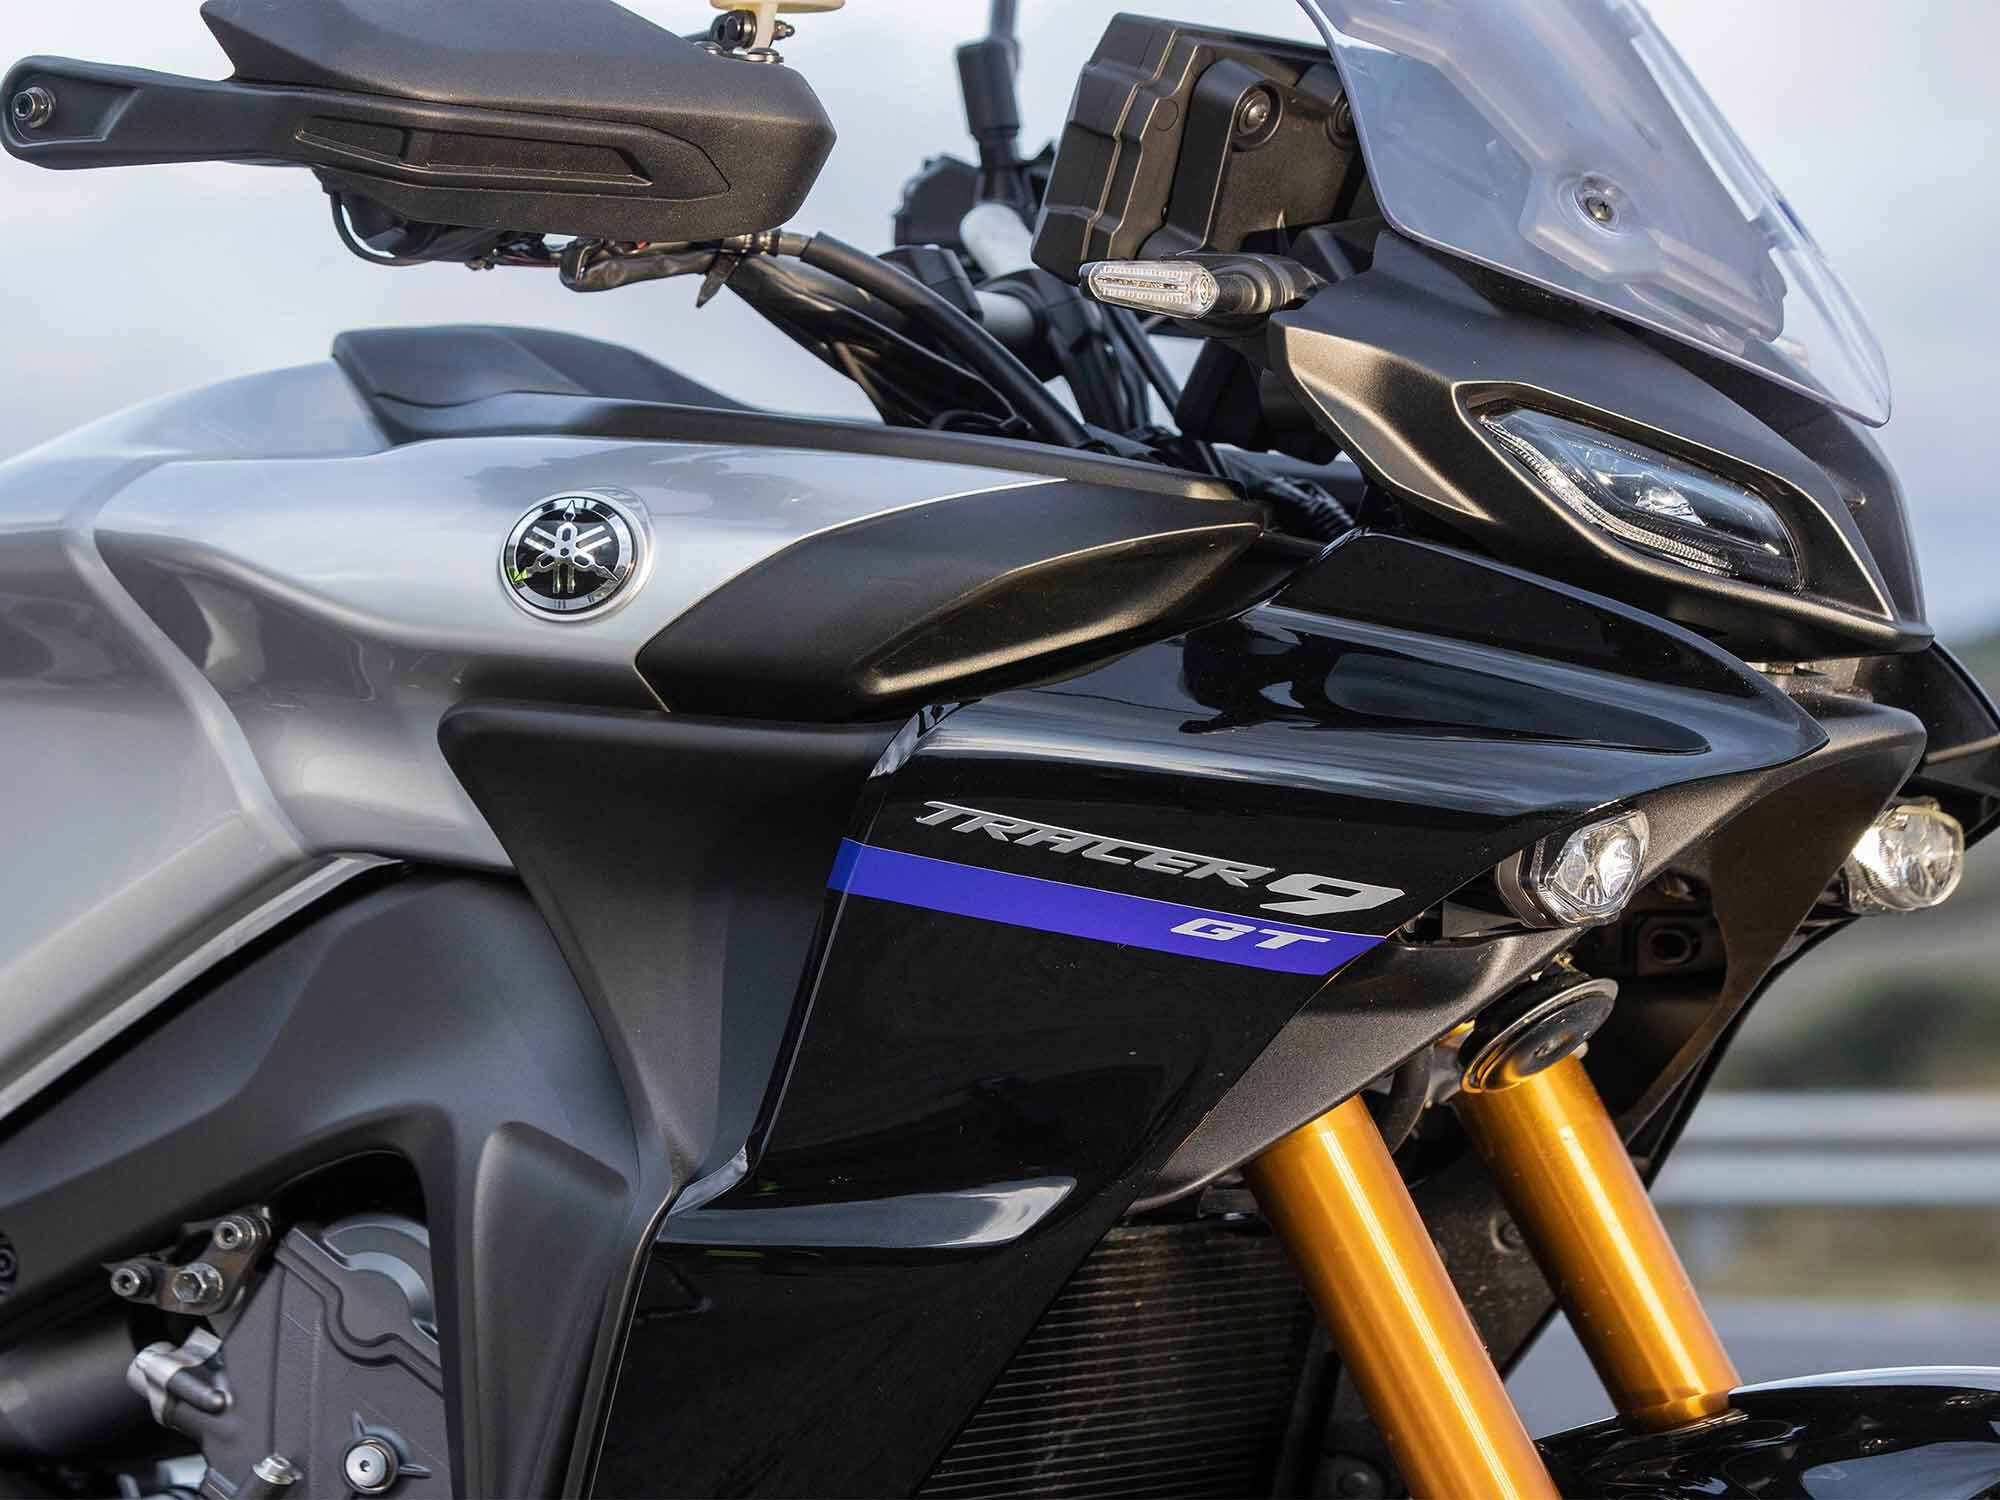 The 2021 Yamaha Tracer 9 GT. There’s no room for zeros here.